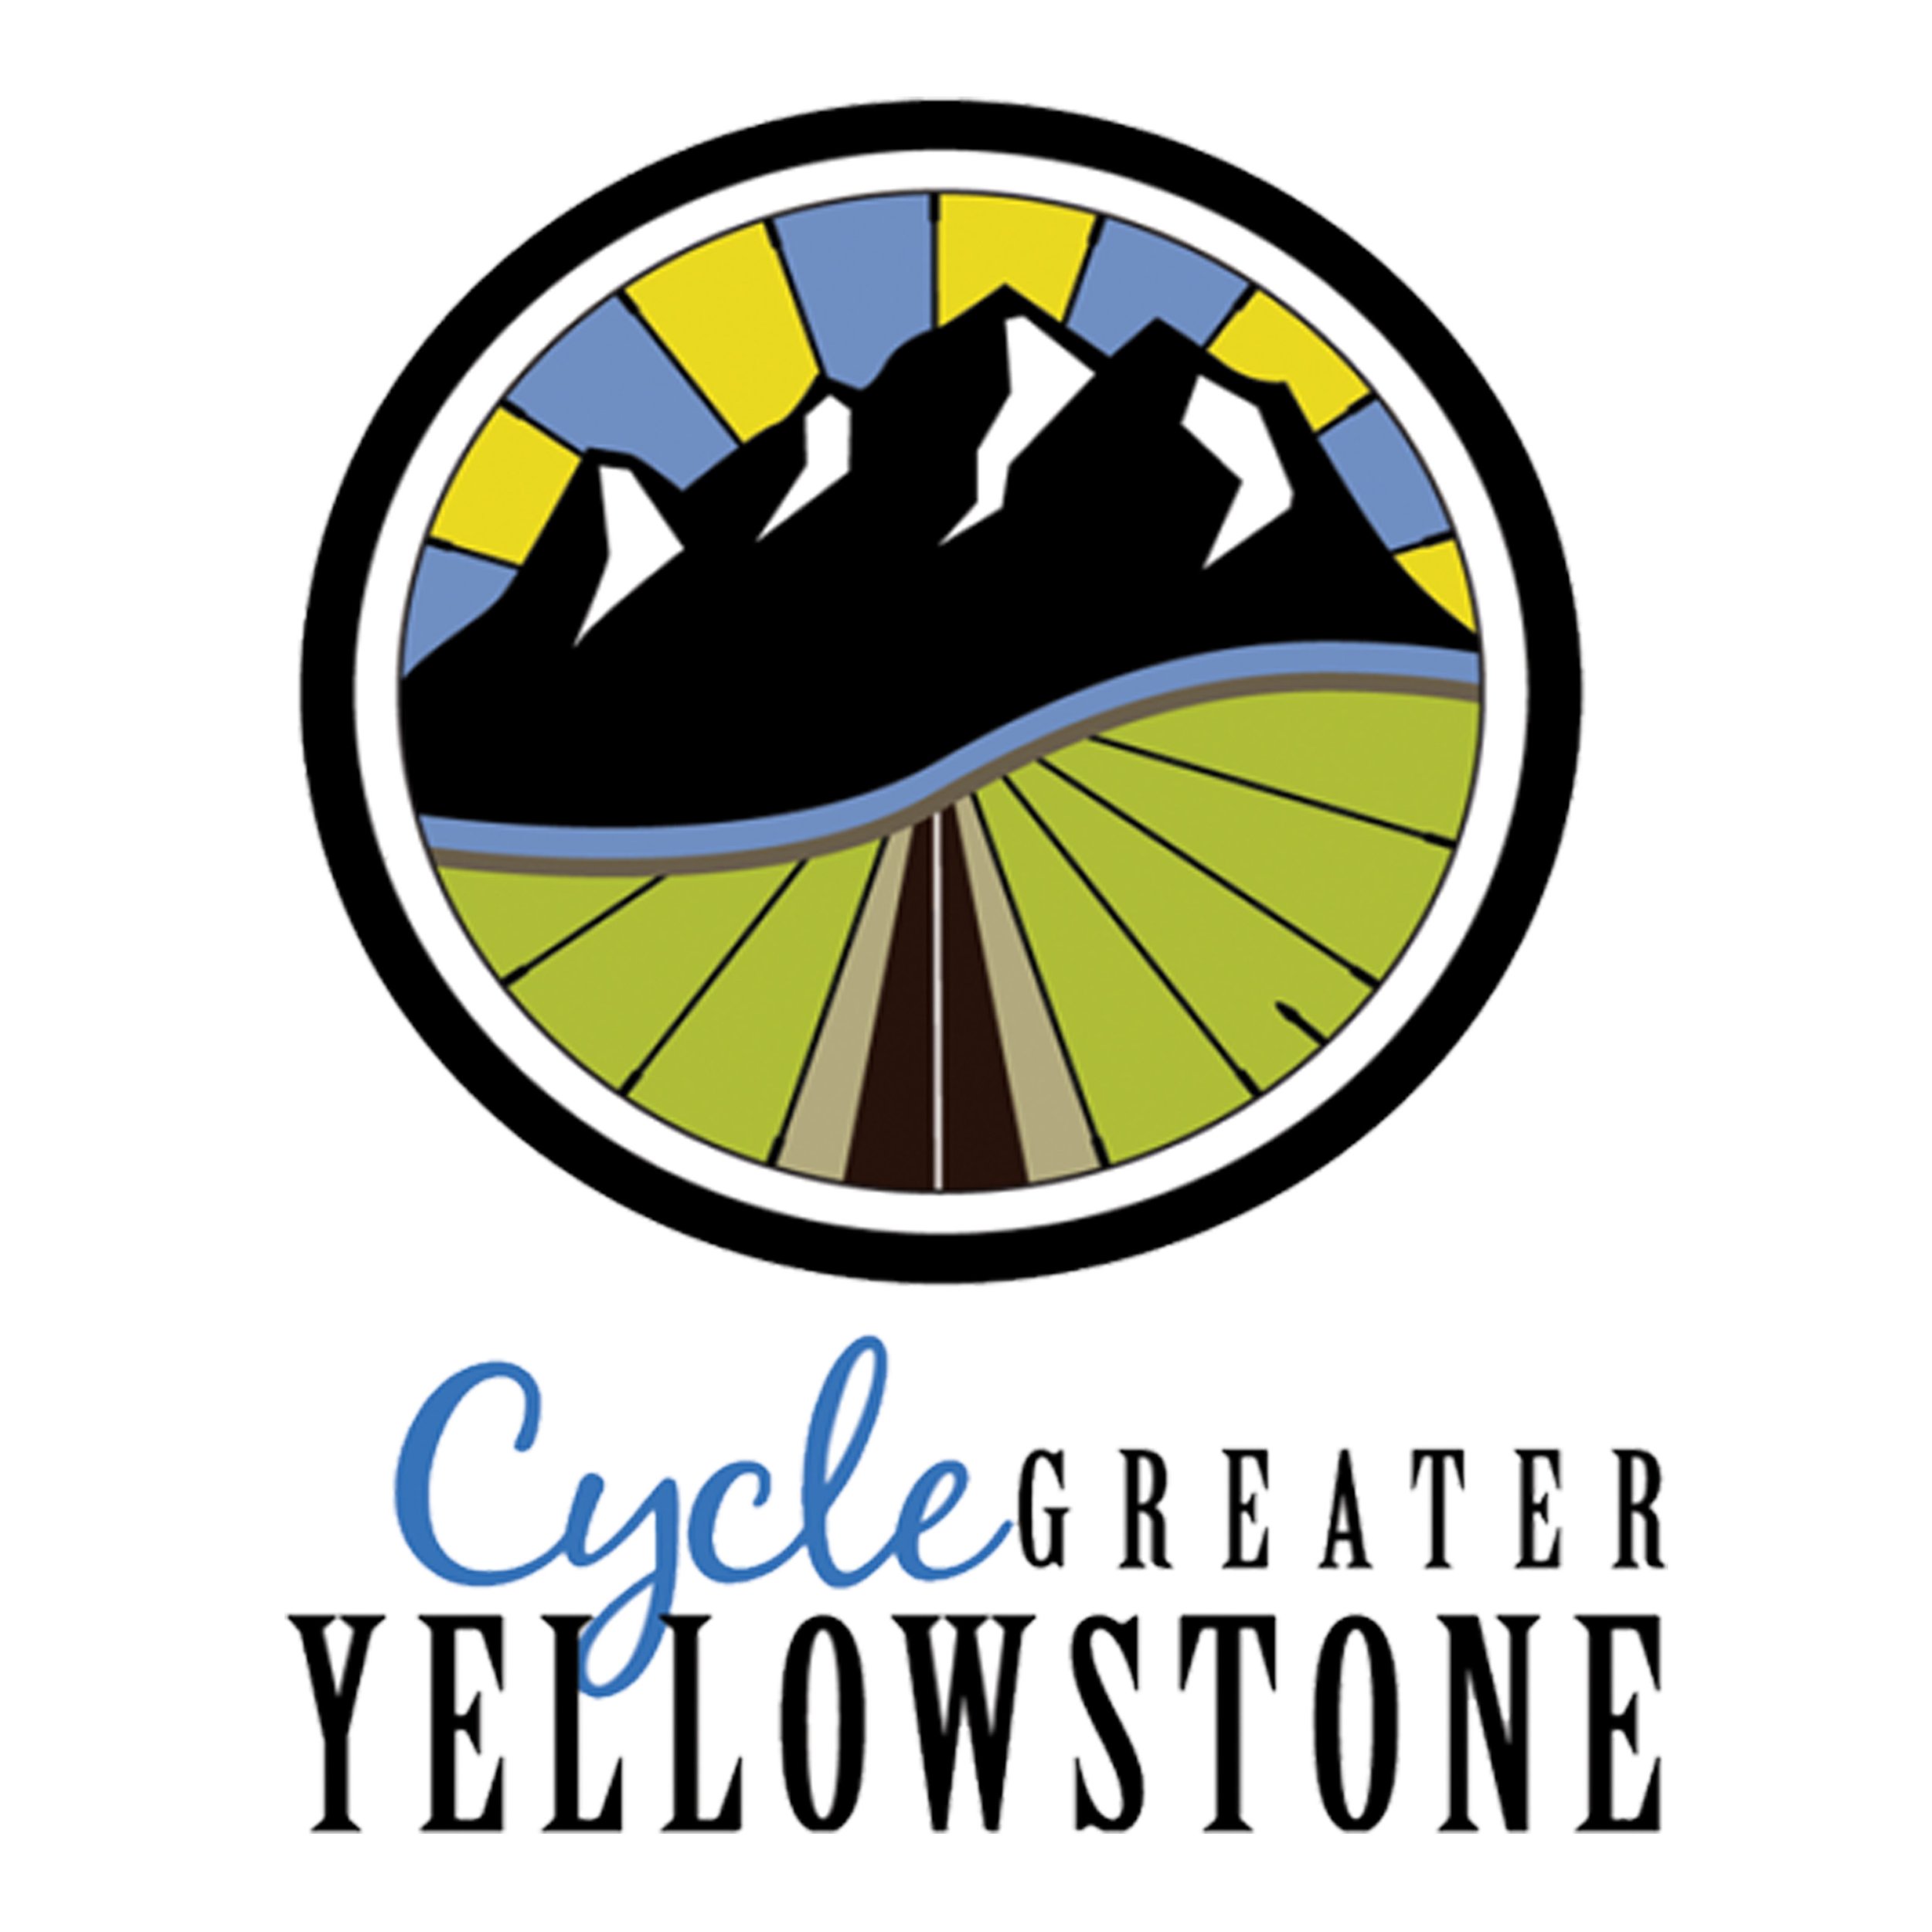 SCDesign_Cycle Greater Yellowstone.jpg